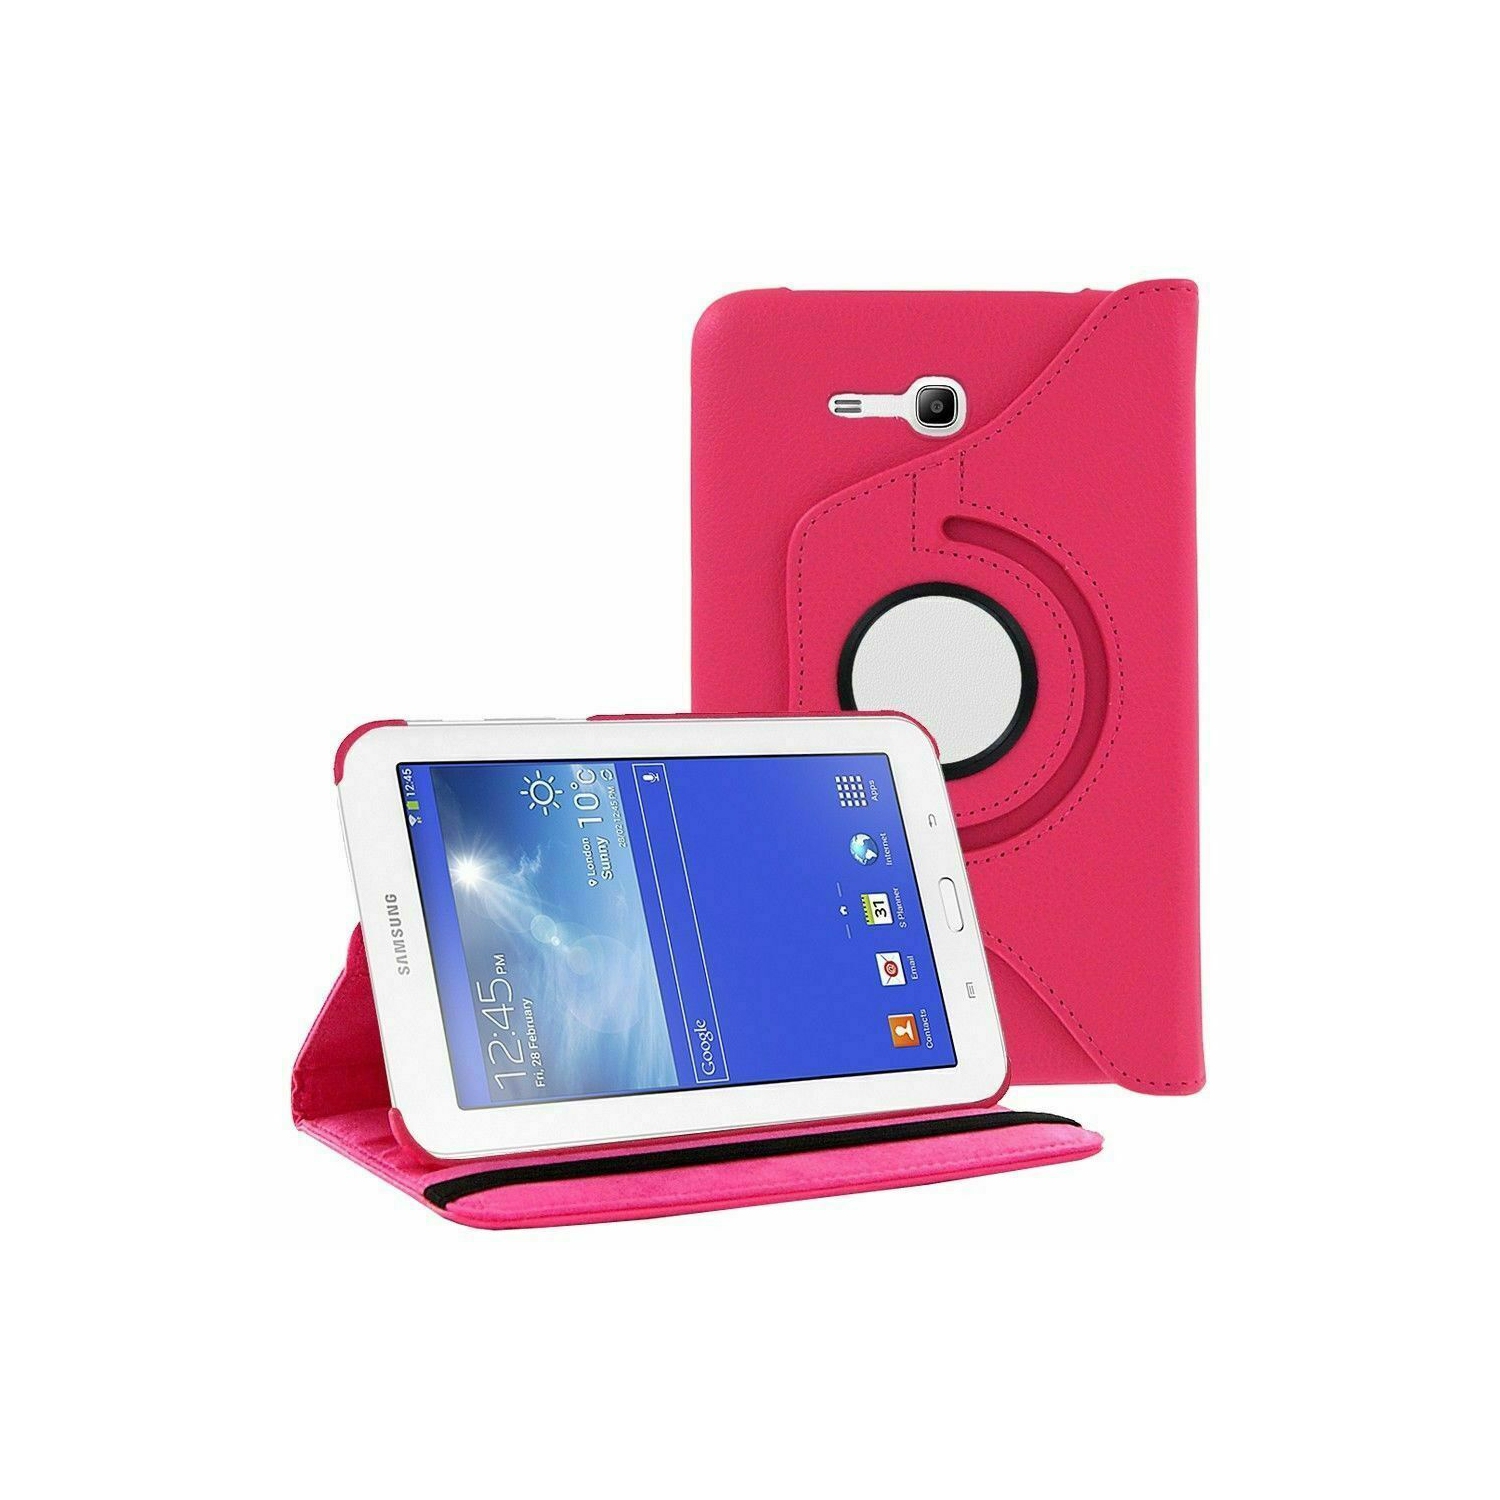 【CSmart】 360 Rotating Leather Tablet Case Smart Stand Cover for Samsung Tab E Lite 7.0" T110 T113 T115, Hot Pink